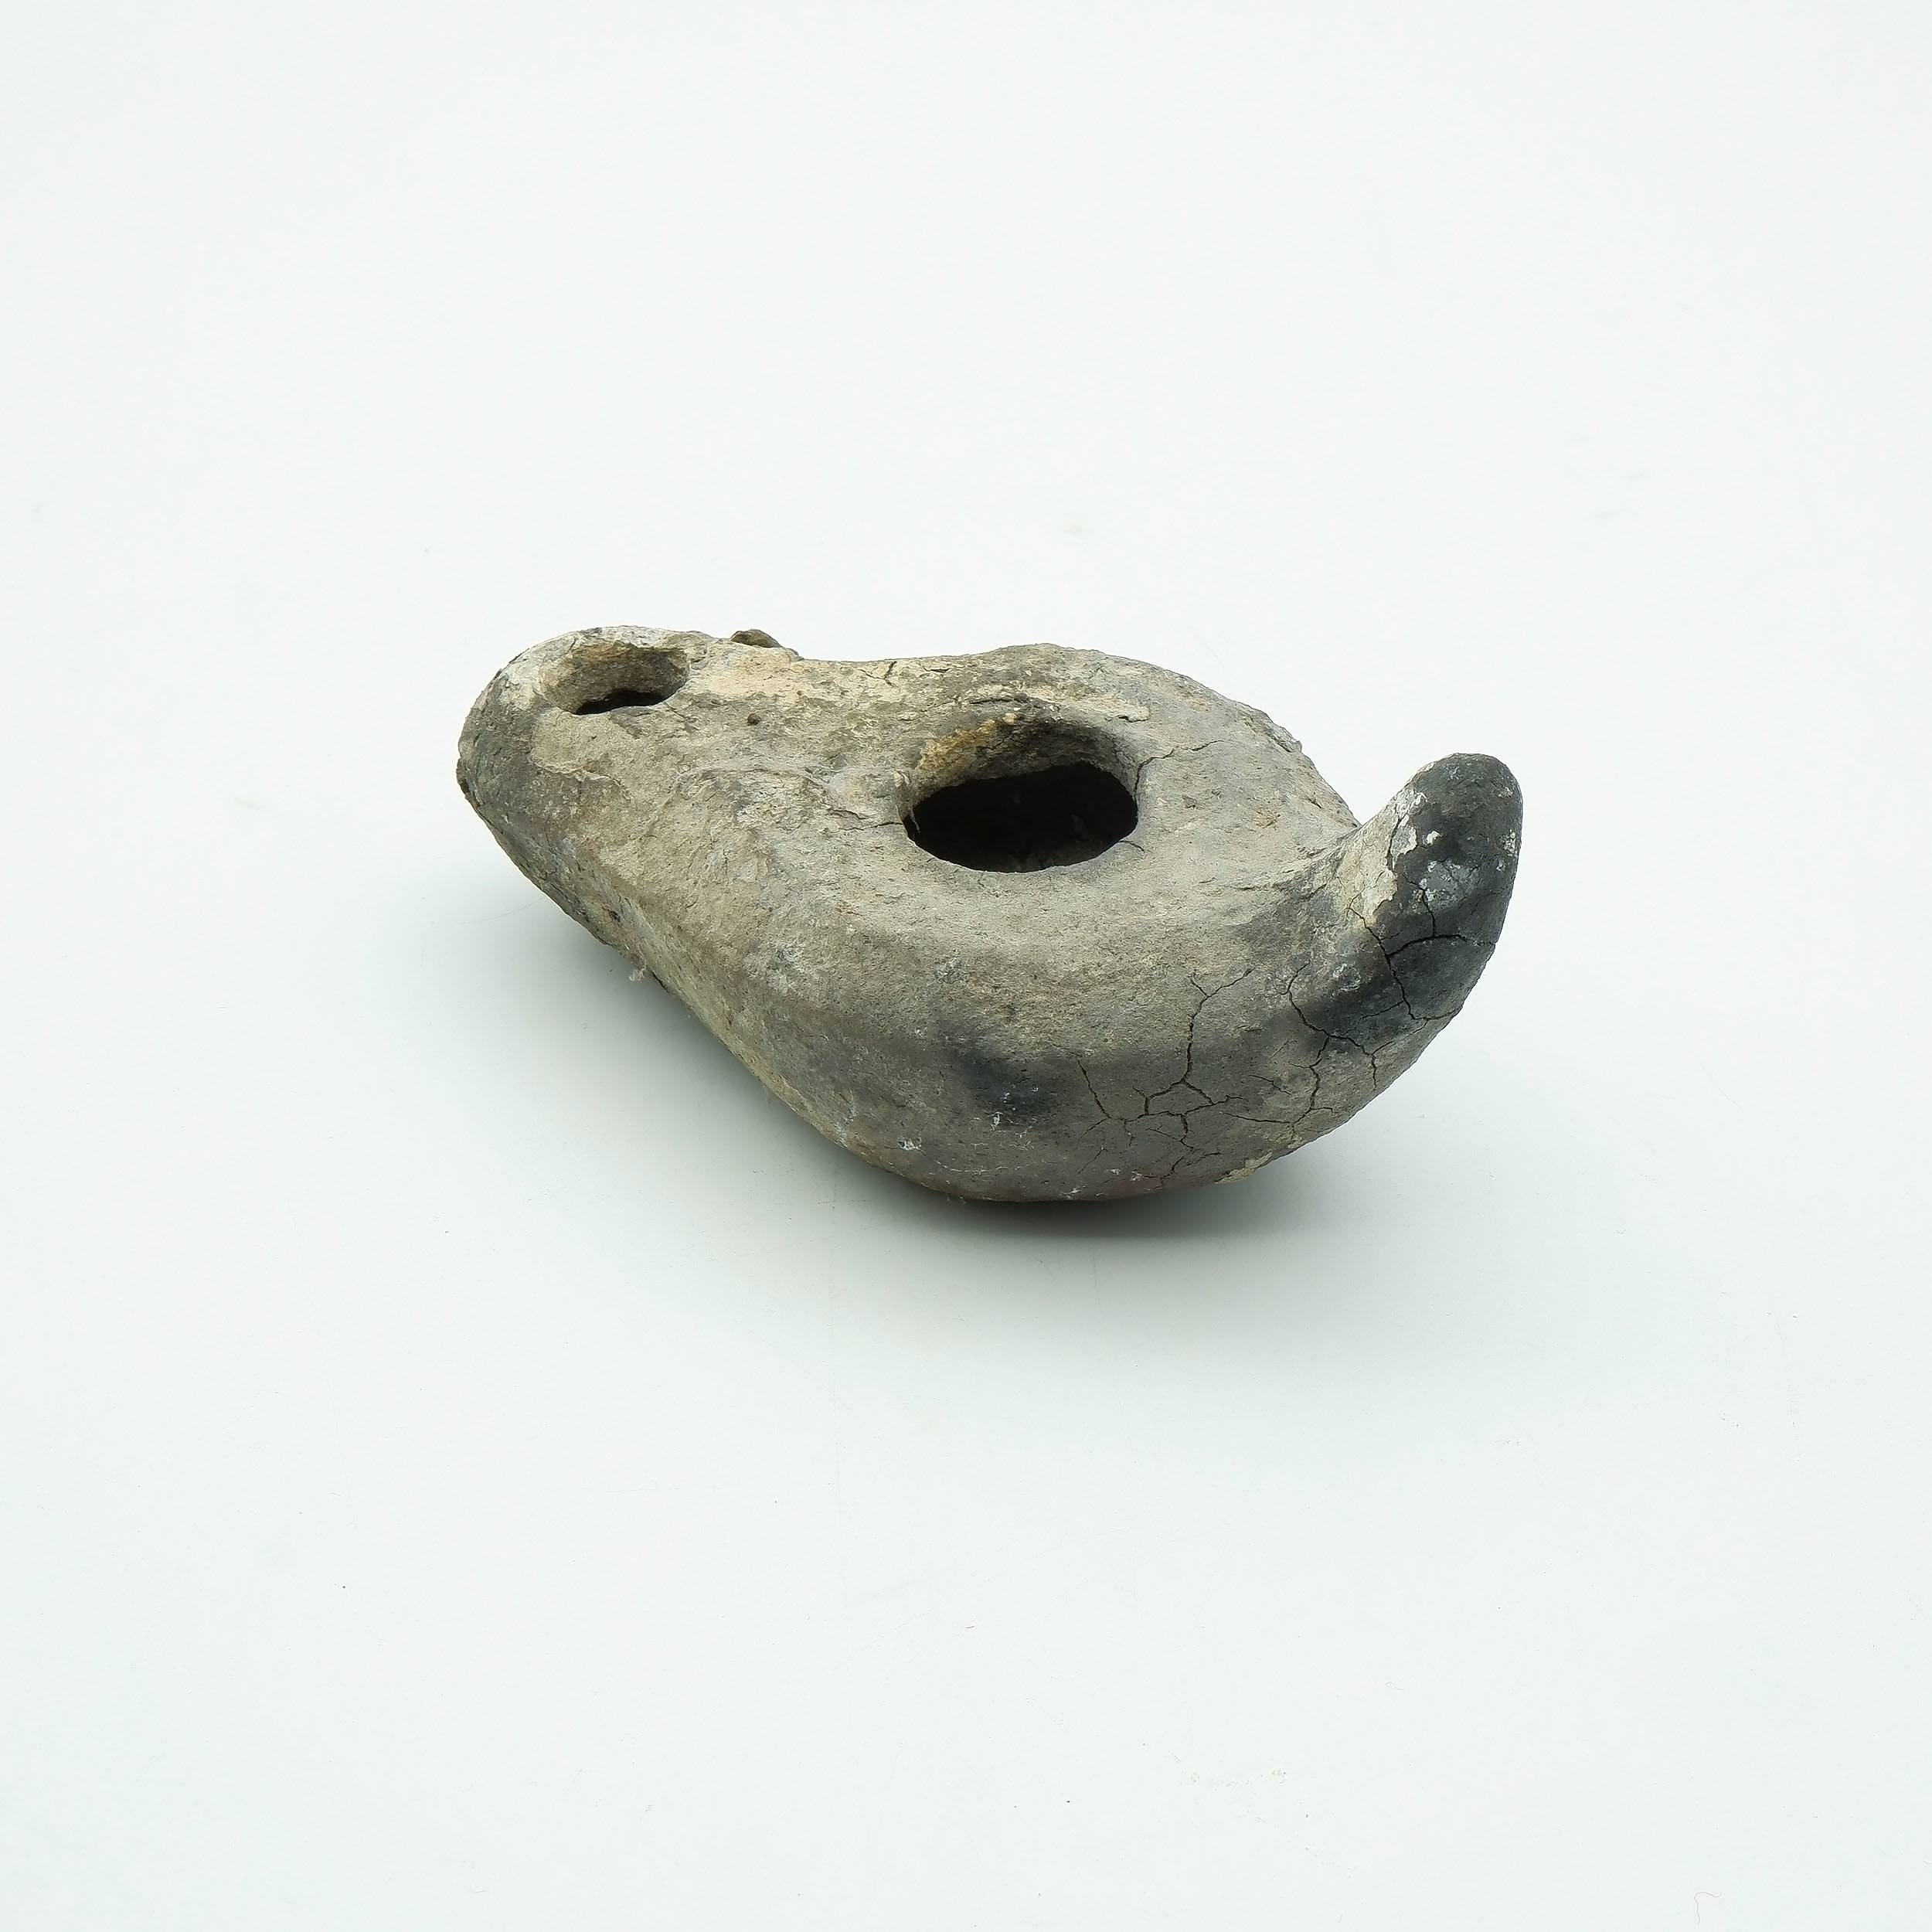 'Roman Oil Lamp Earthenware Collected 1953'